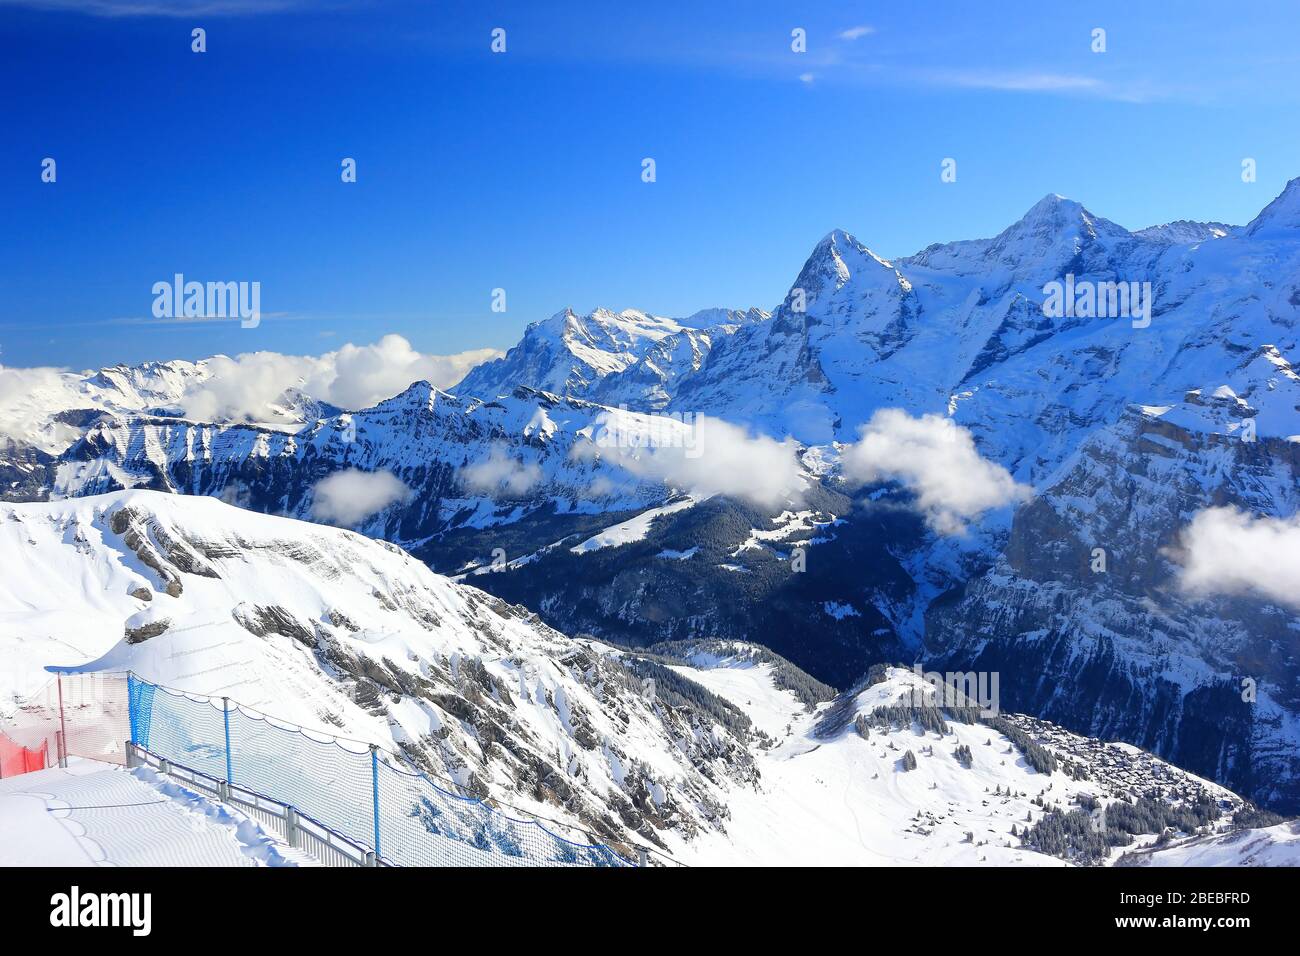 View of Eiger and Mönch from Schilthorn. Bernese Alps of Switzerland, Europe. Stock Photo